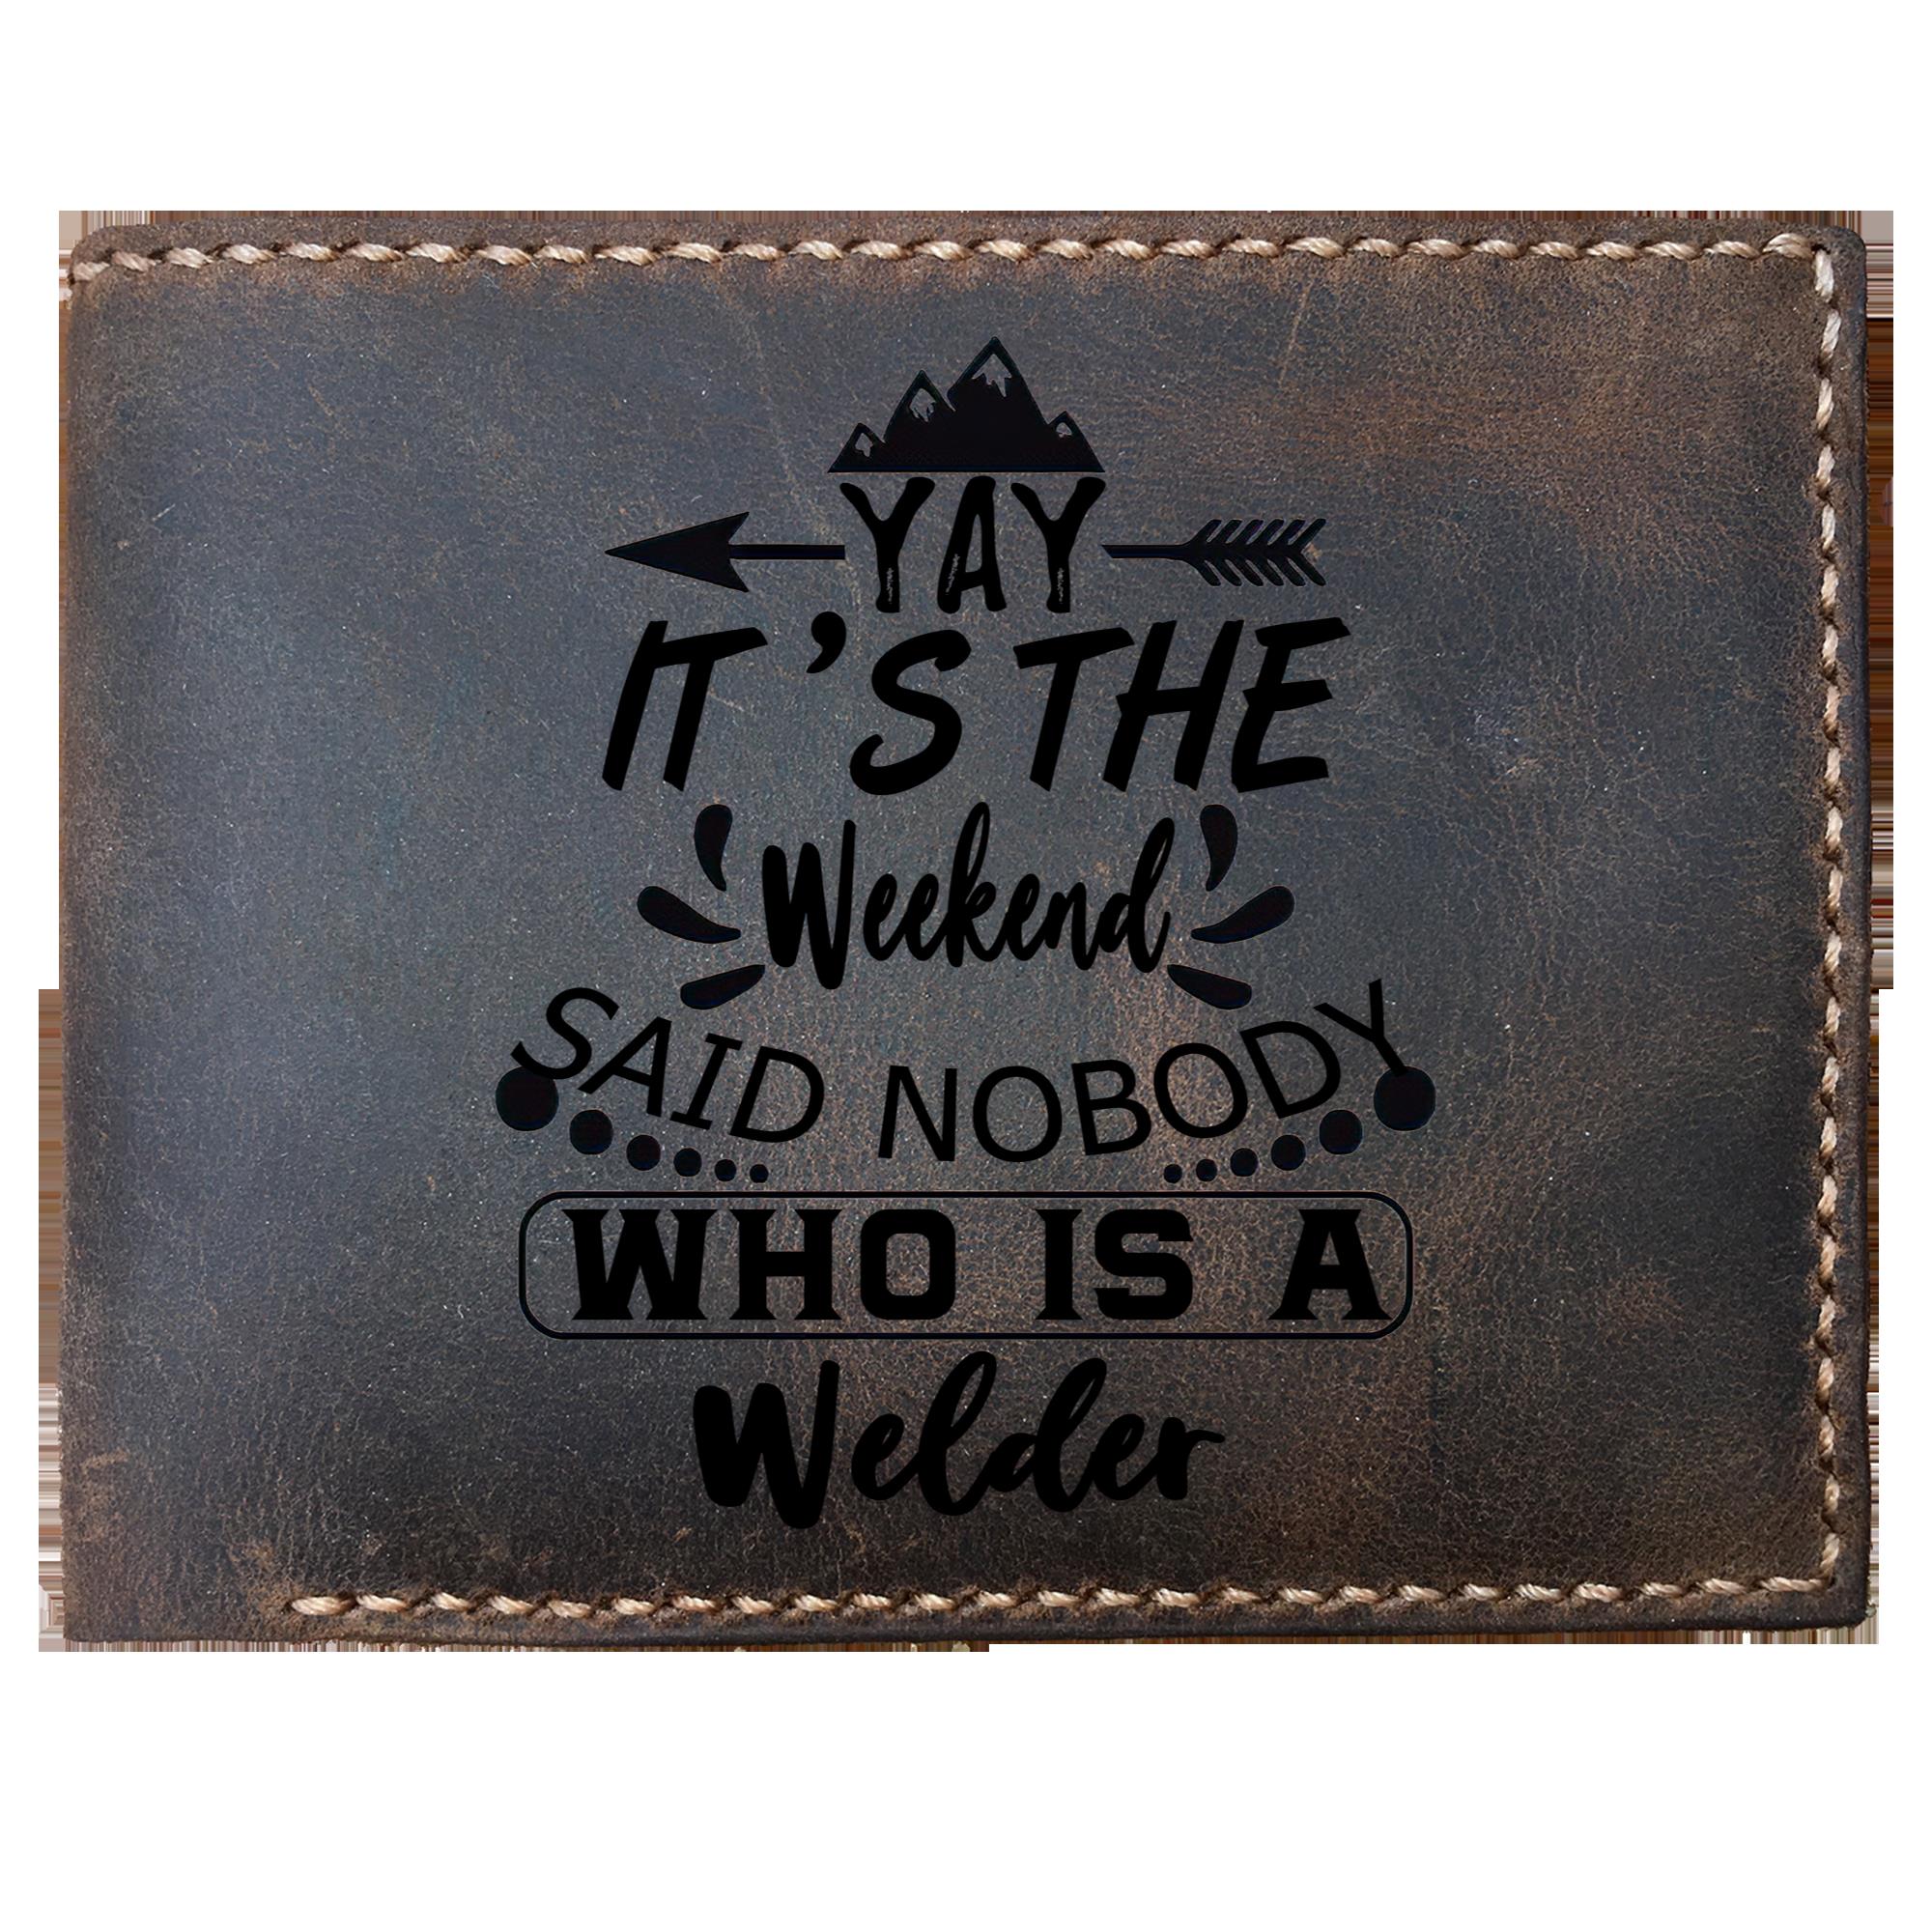 Skitongifts Funny Custom Laser Engraved Bifold Leather Wallet For Men, It's The Weekend Said Nobody Who Is A Welder, Father's Day Gifts